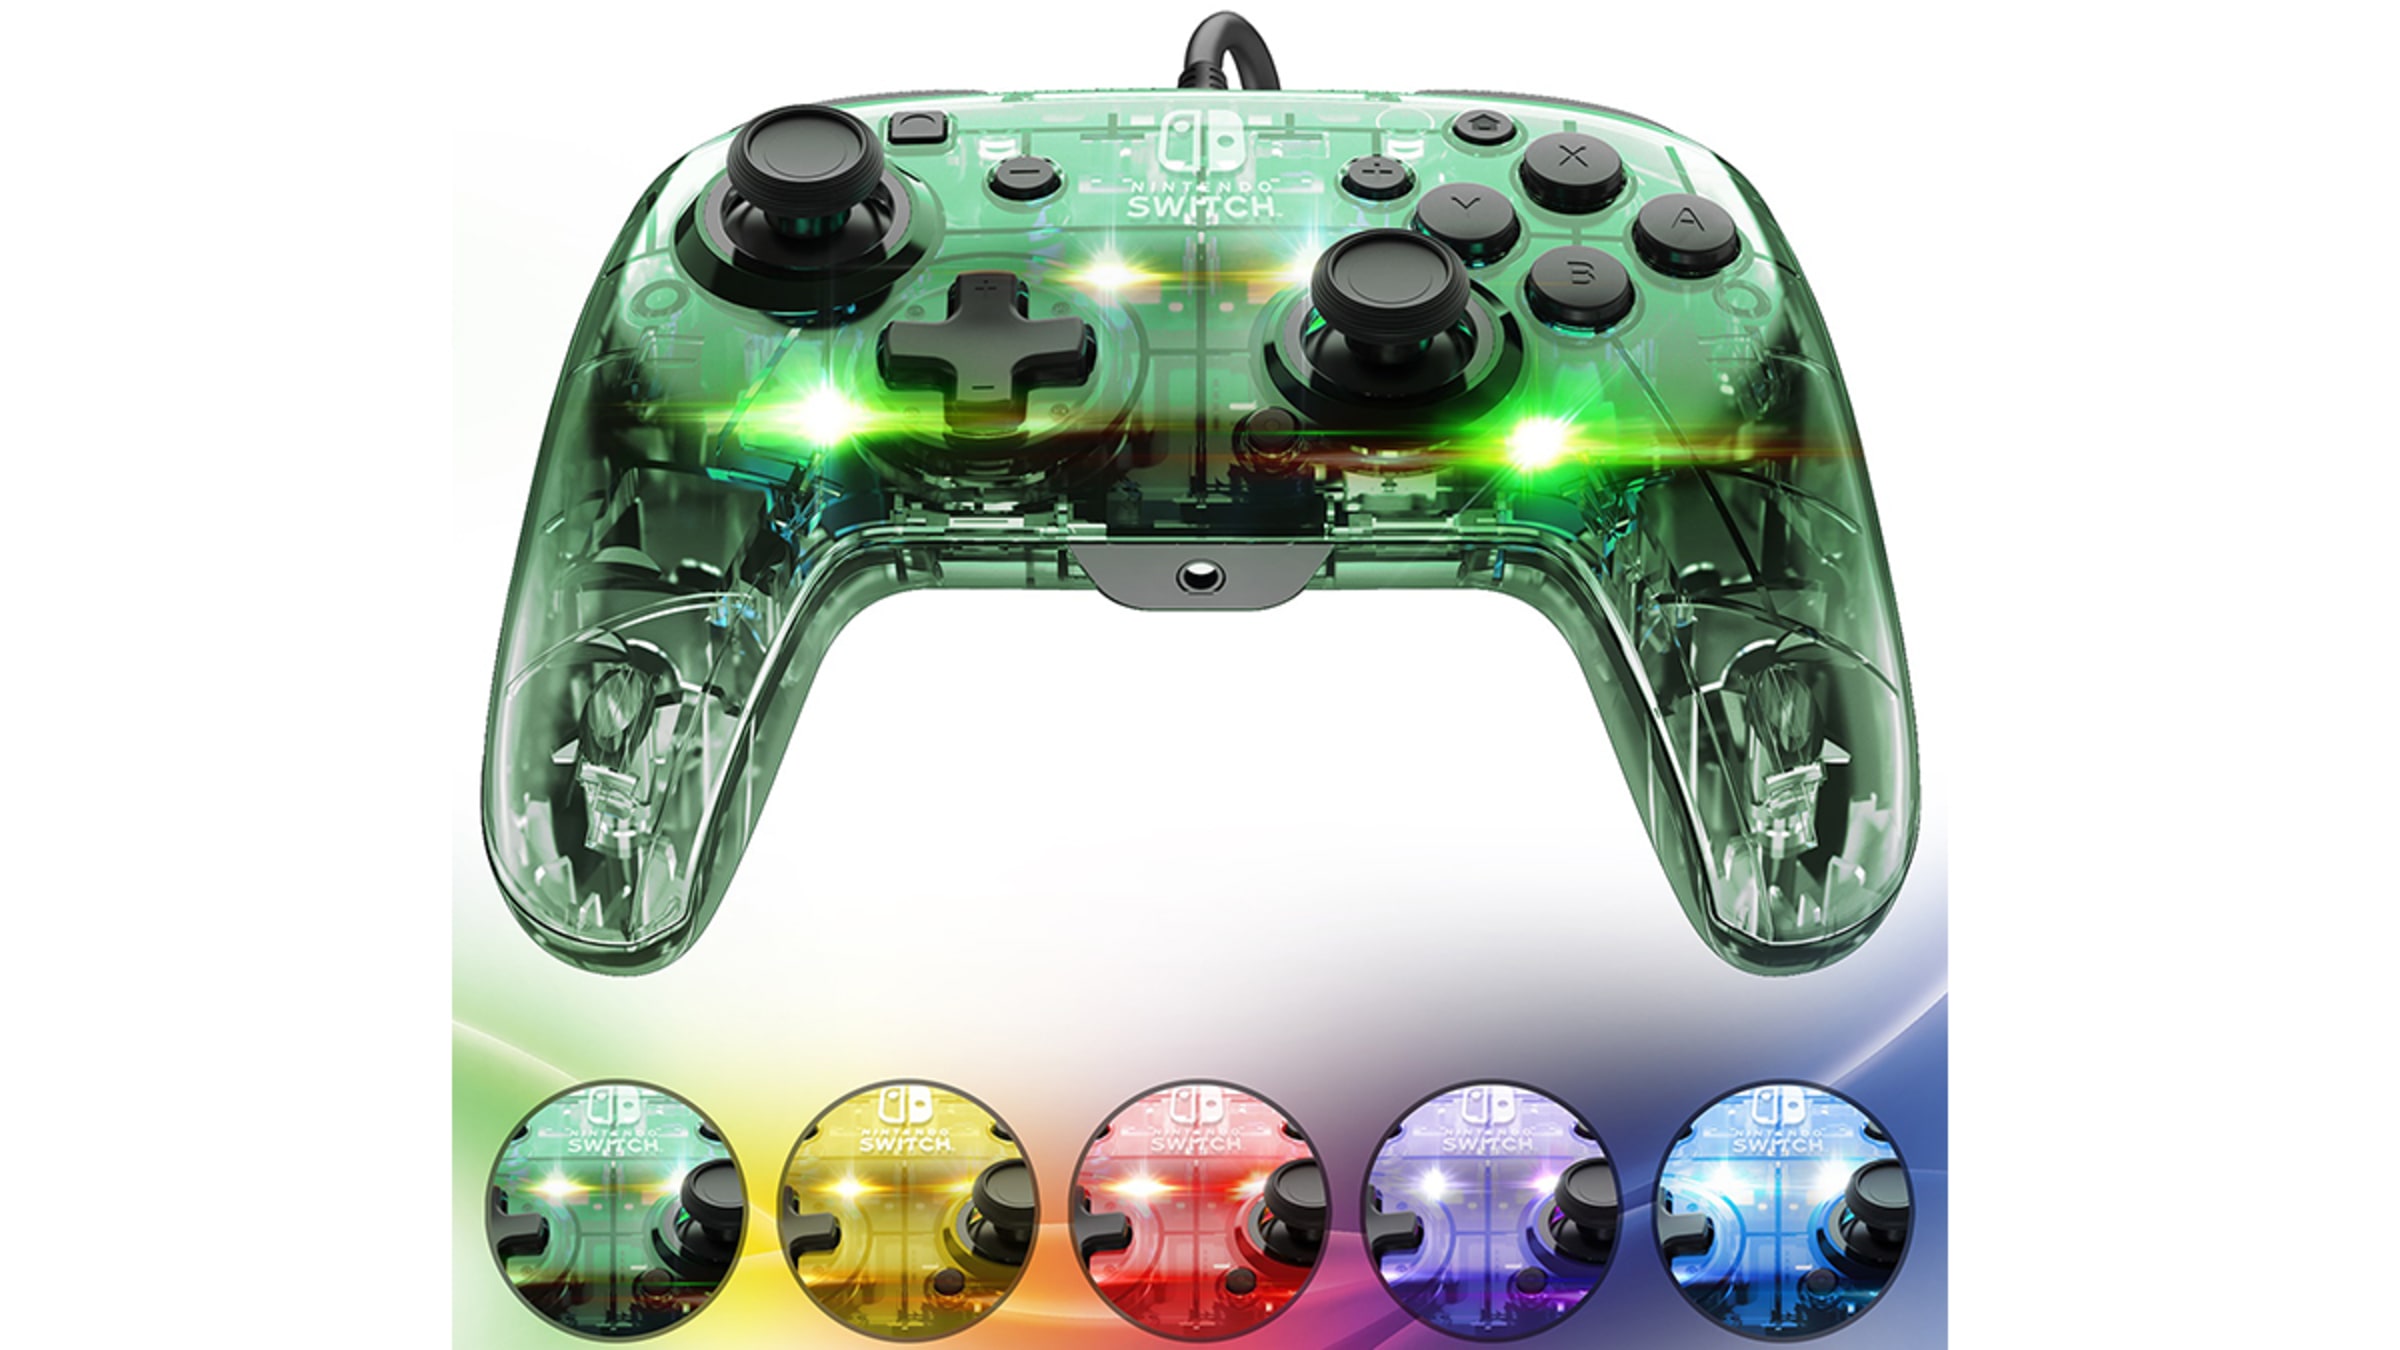 Misbruge Memo Landmand Afterglow Wired Deluxe Controller for Switch - Hardware - Nintendo -  Nintendo Official Site